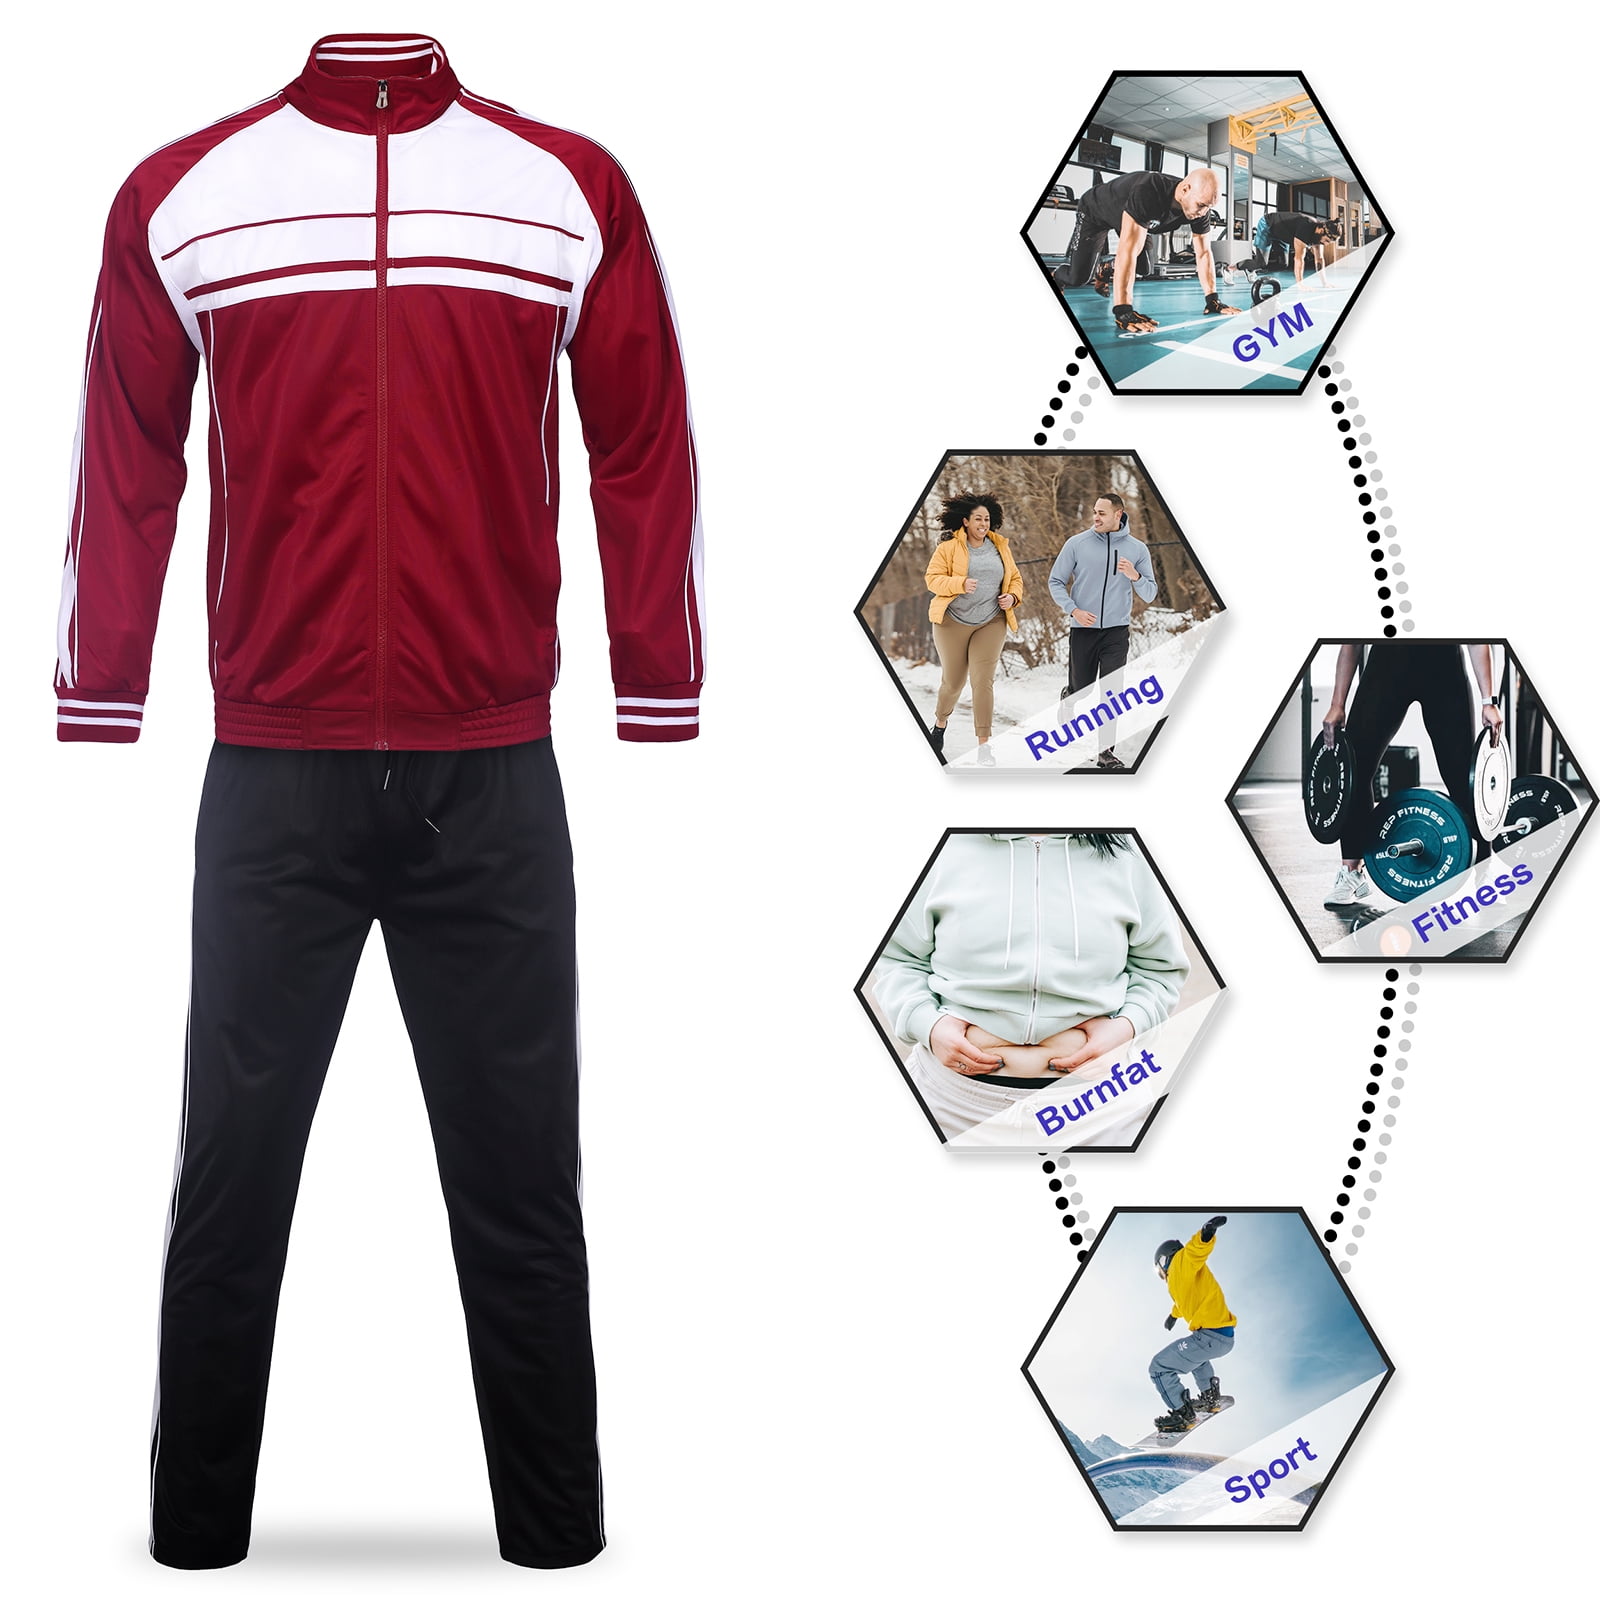 Red Tracksuit Men Jogger Suits 2 Piece Winter Hooded Tracksuits Long Sleeve  Full Zip Sports Set Red Warm Jacket Track Suit(Red,4XL)